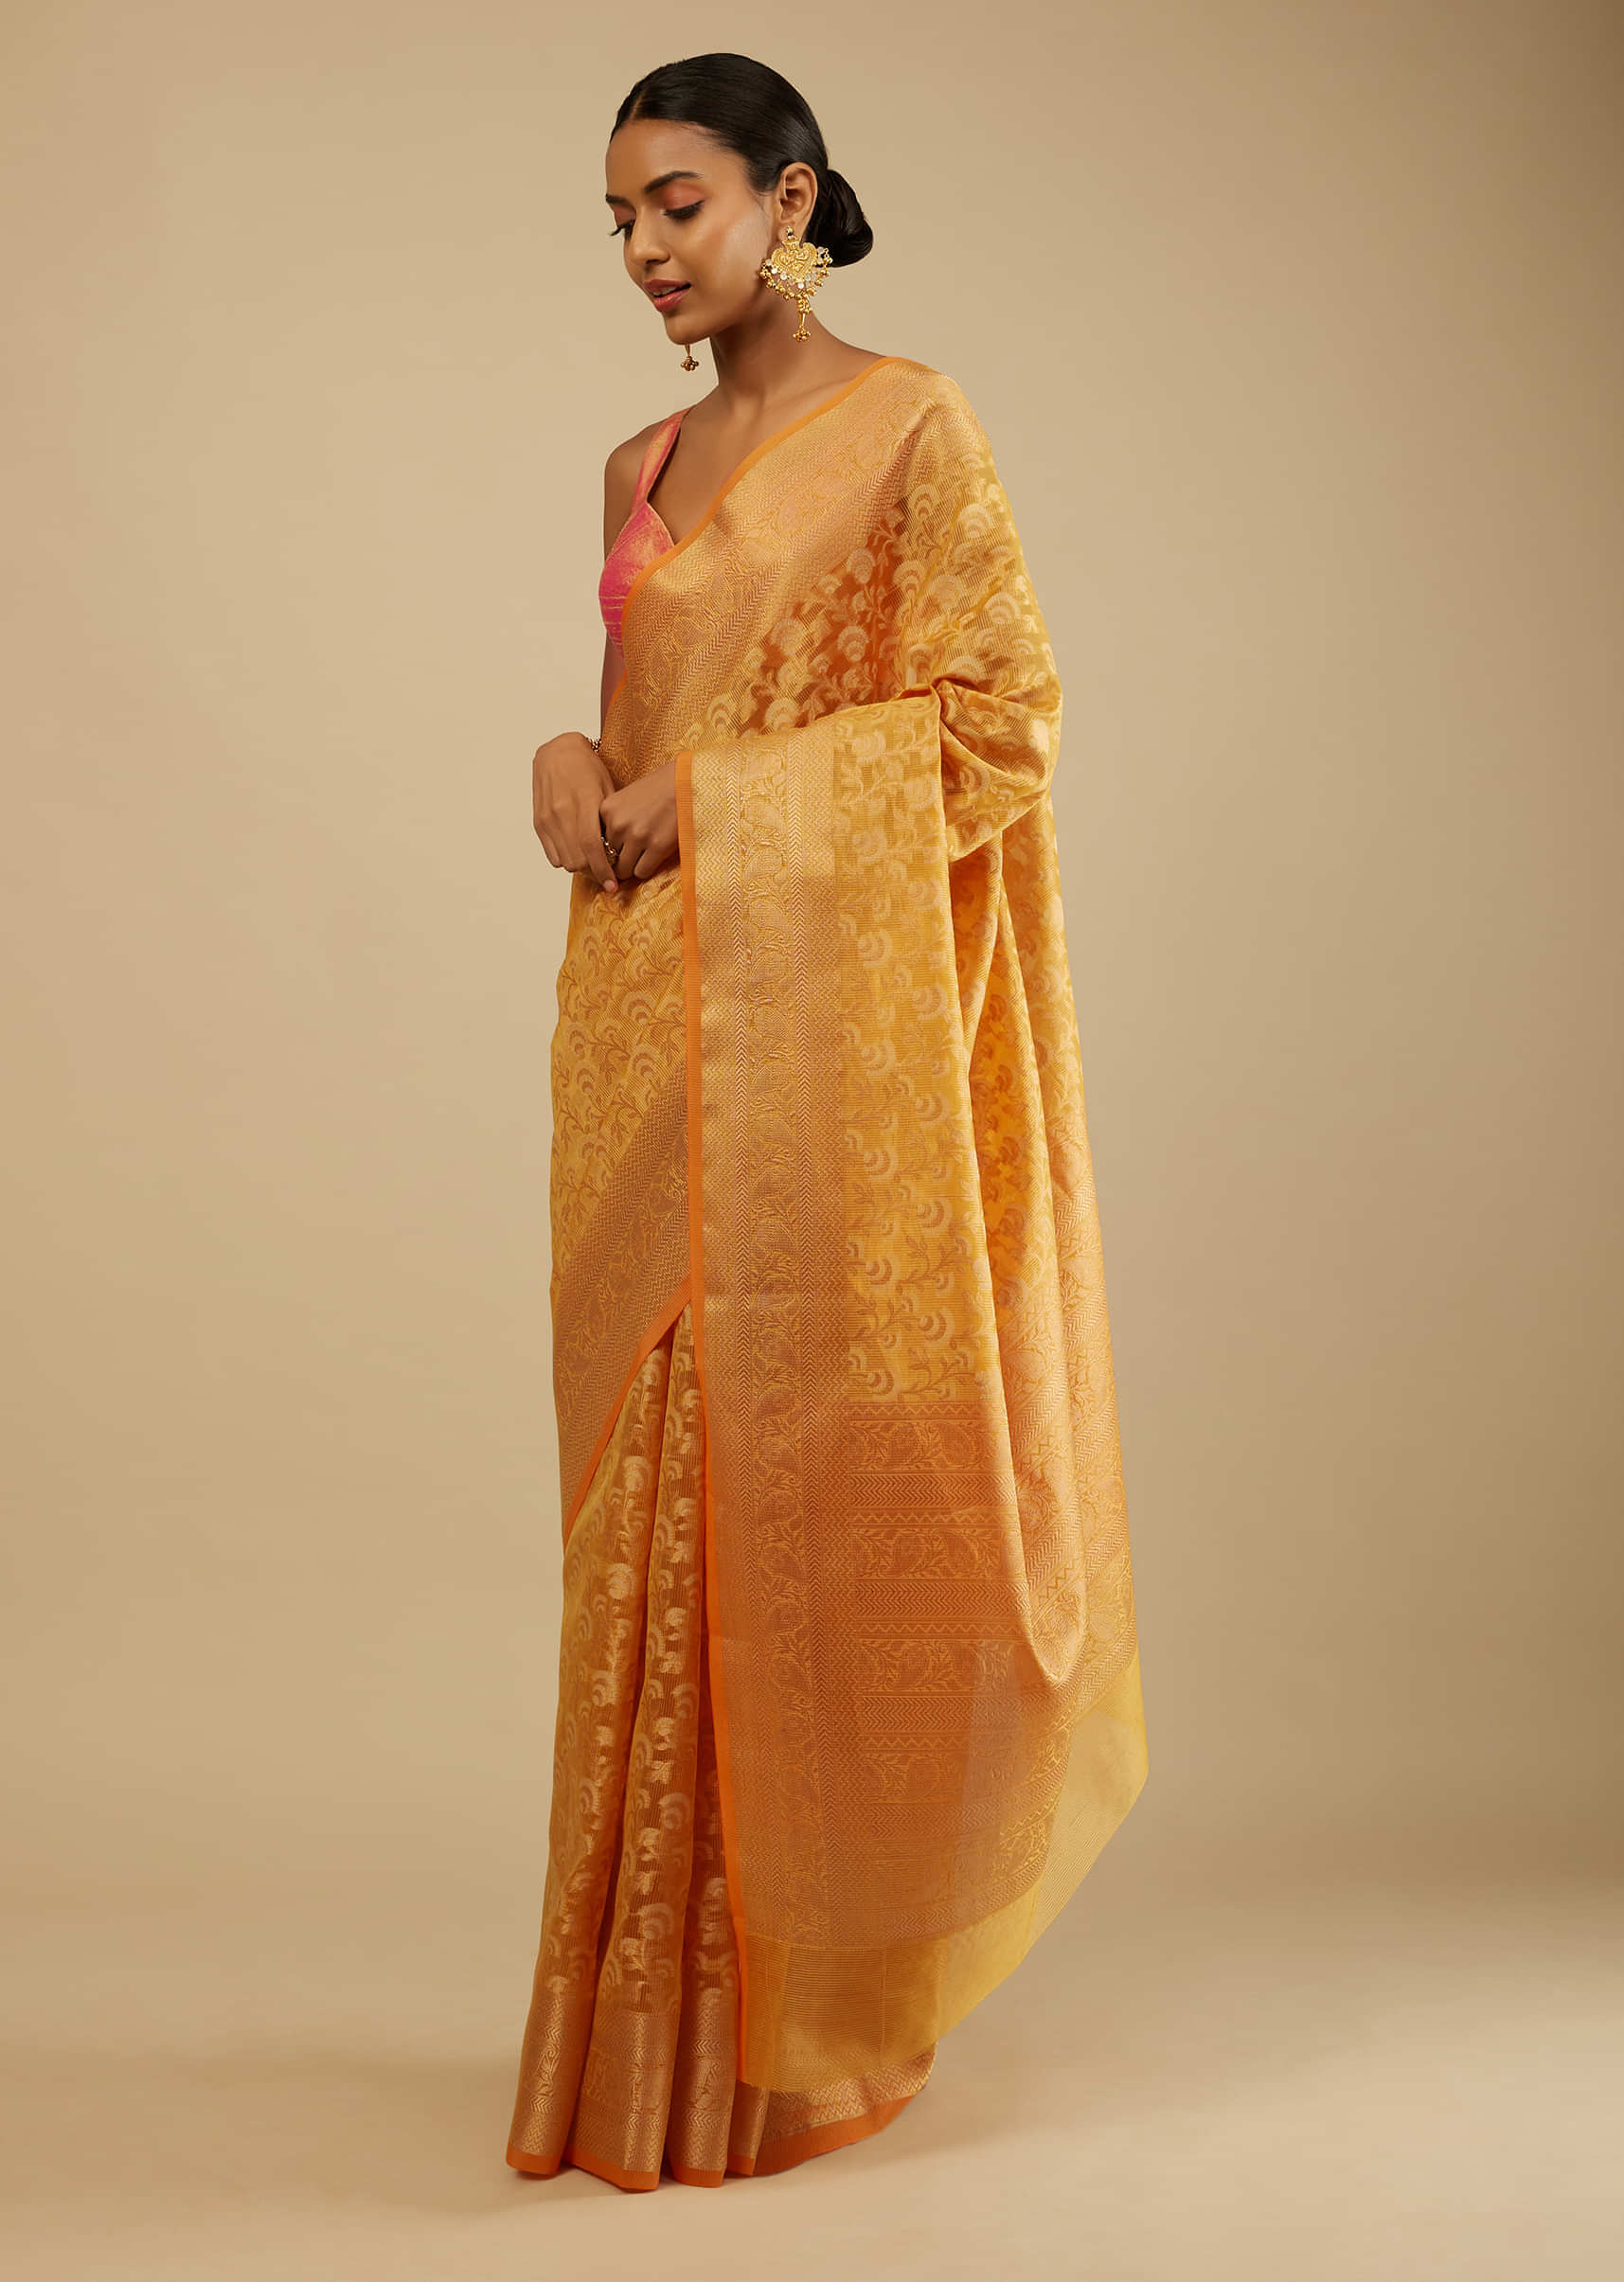 Apricot Yellow Saree In Organza Silk With Woven Floral Jaal In Shades Of White And Gold Along With Unstitched Blouse  